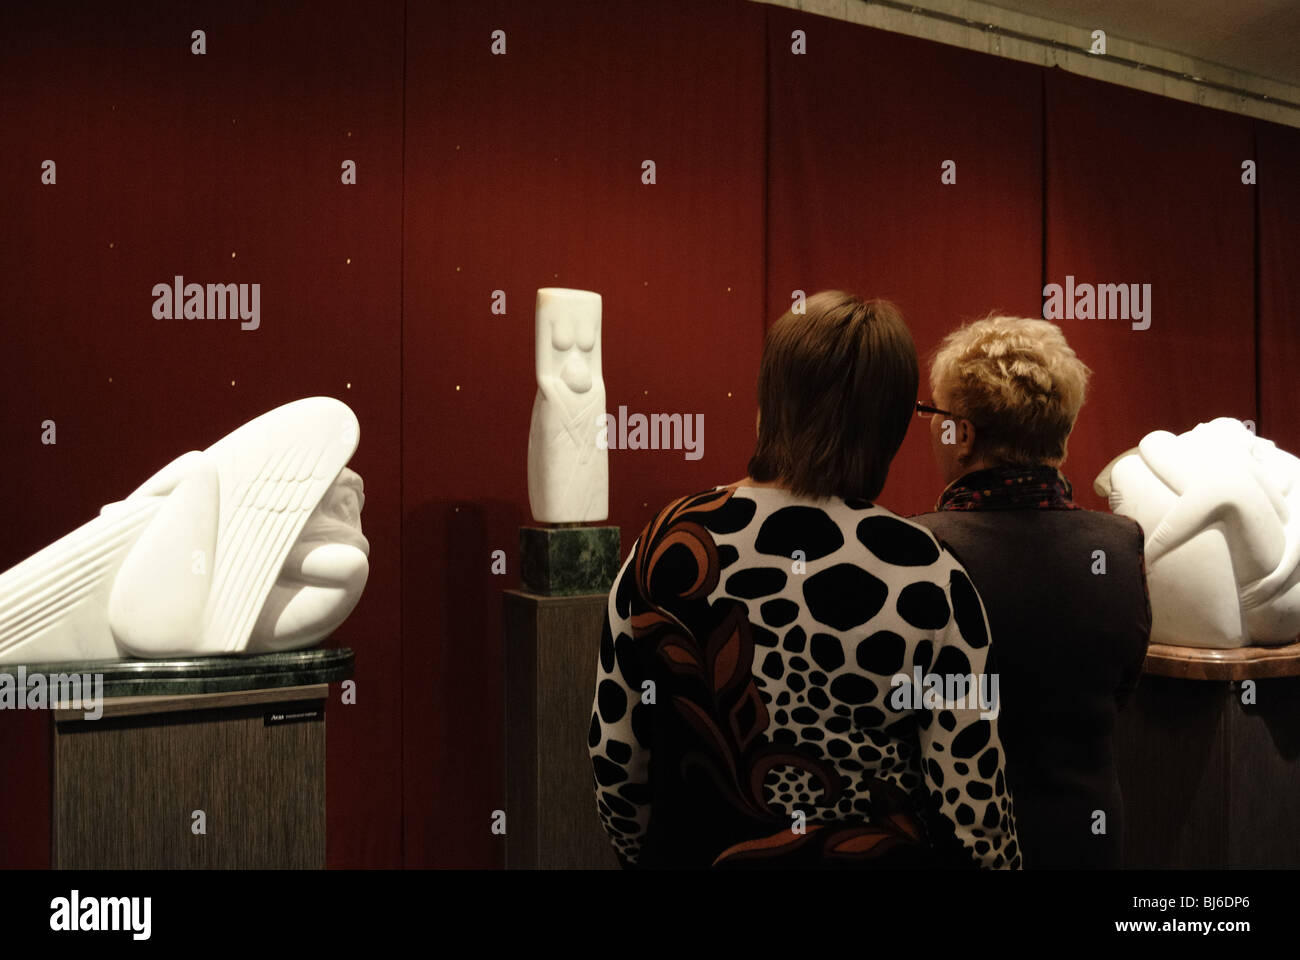 Visitors view sculptures displayed at a Great Sculpture Exhibition Stock Photo